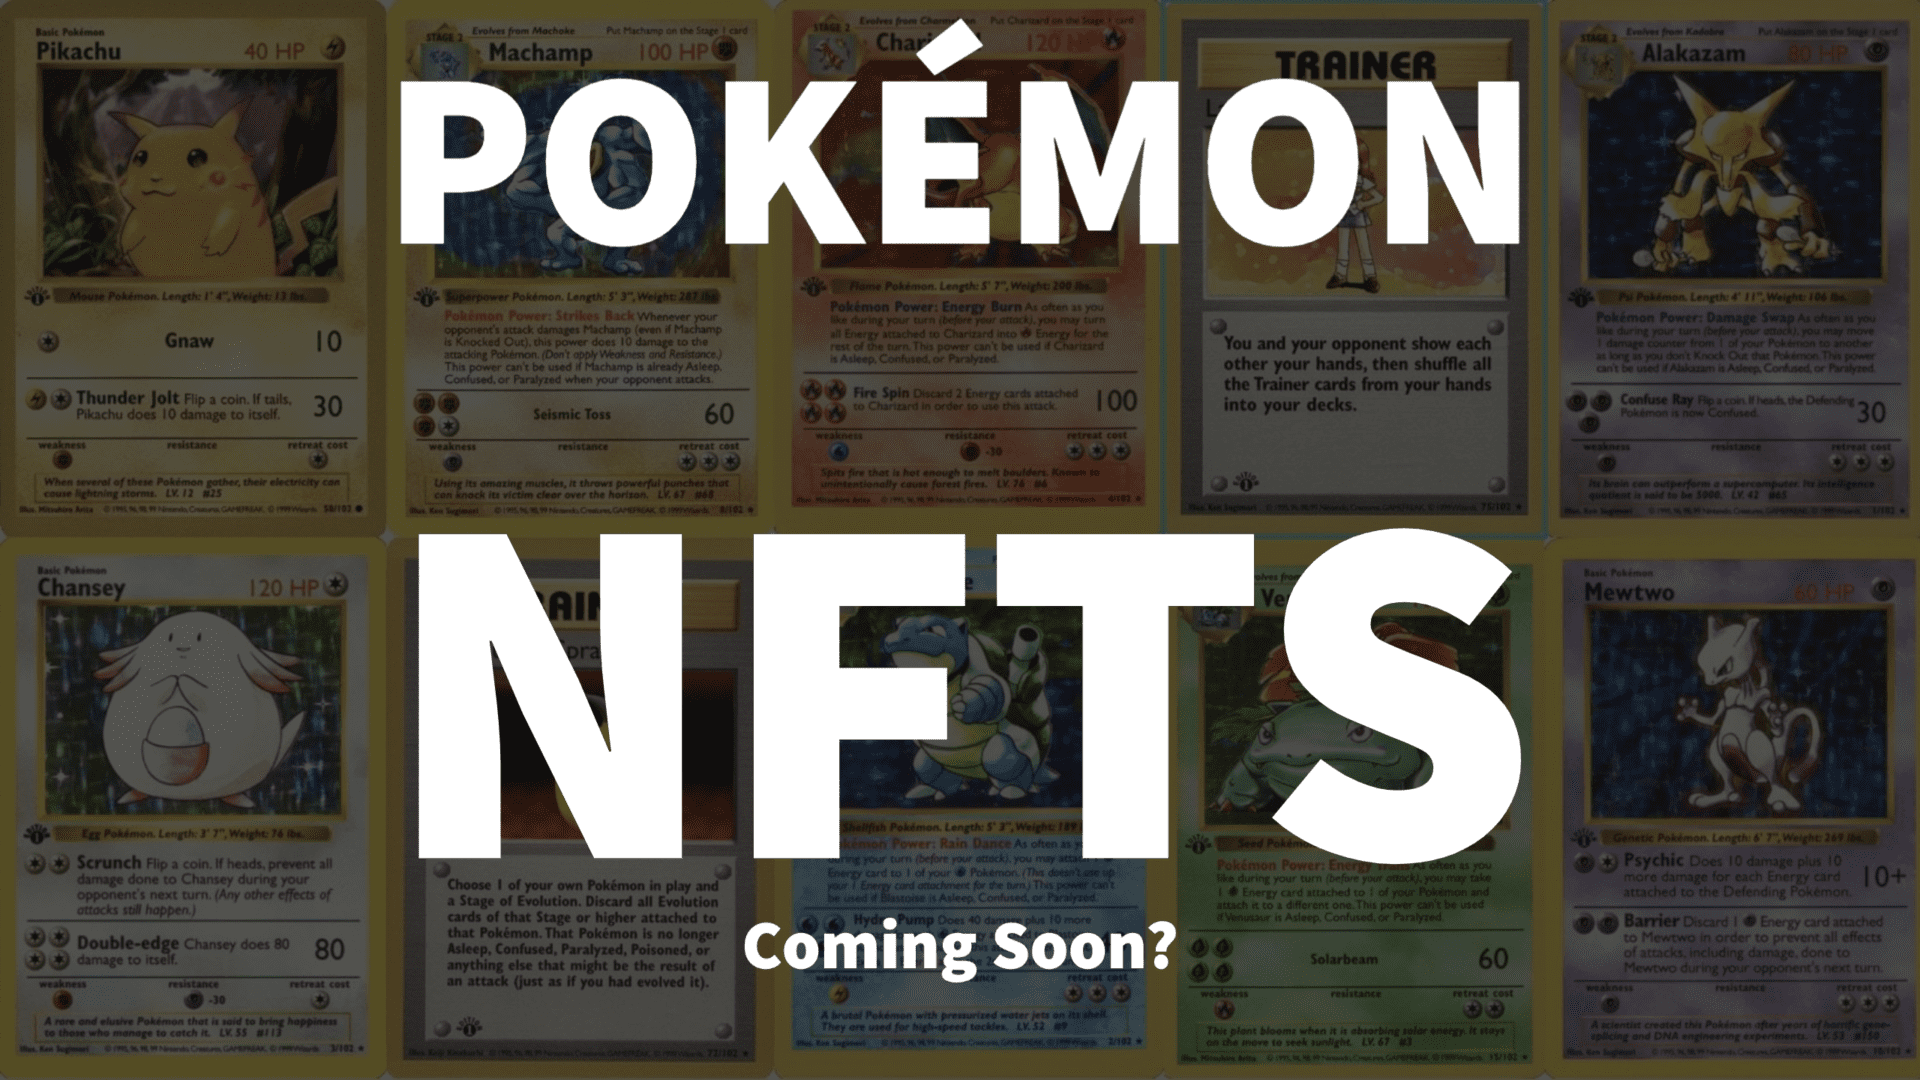 Pokémon NFTs are likely closer than you think